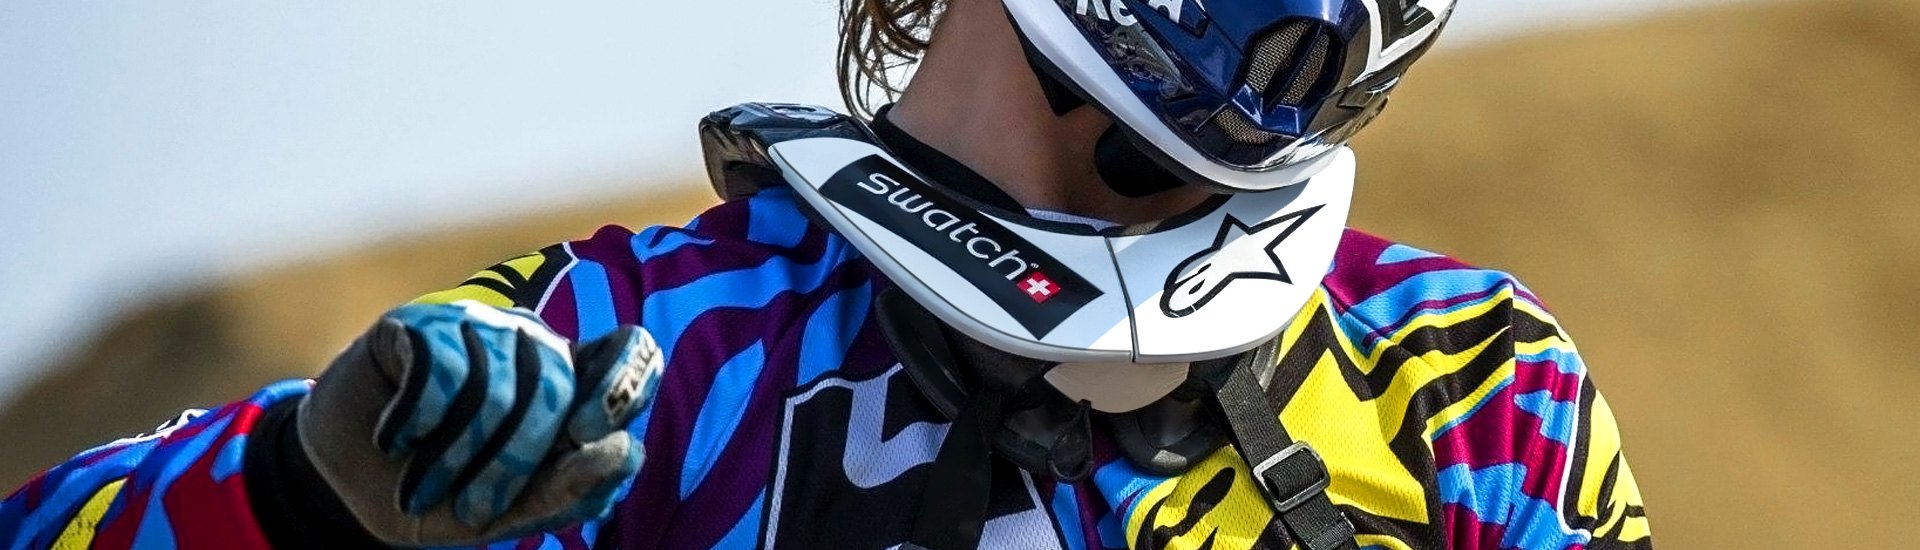 Why Should You Consider a Neck Brace for Motorcycle Riding?